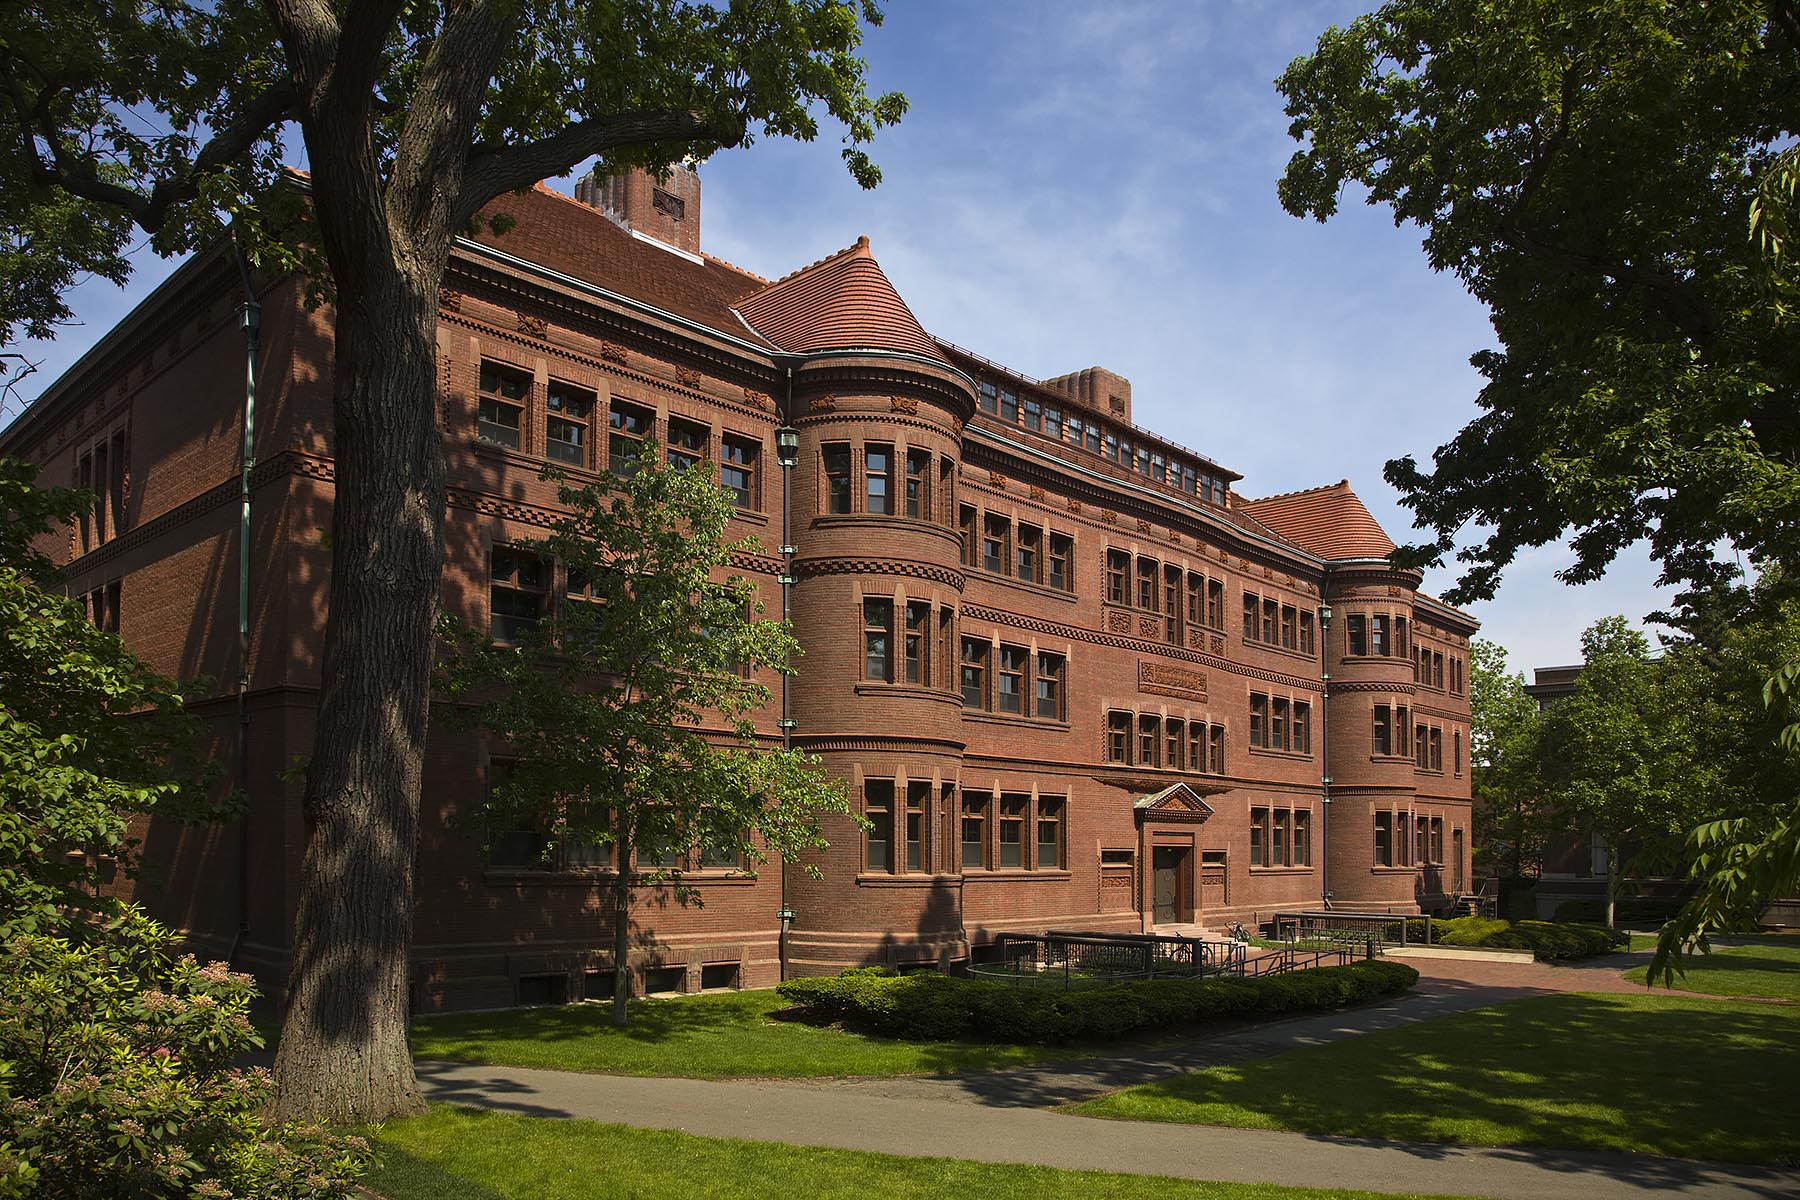 SEVER HALL was completed in 1880 and is a National Historic Landmark at HARVARD UNIVERSITY - CAMBRIDGE, MASSACHUSETTS